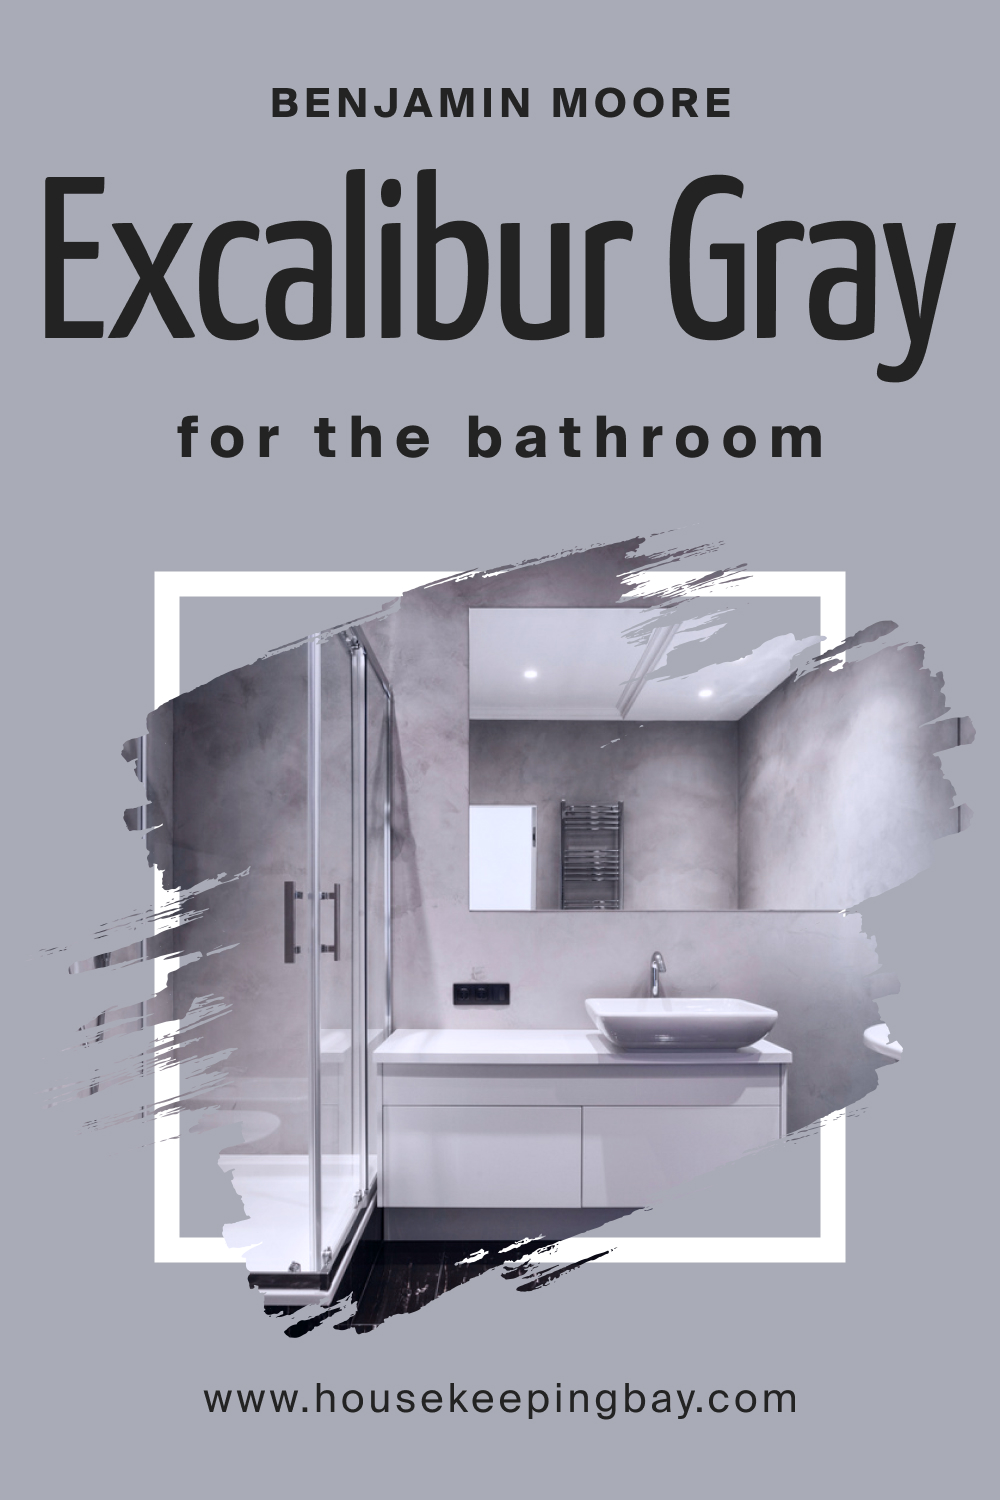 How to Use BM Excalibur Gray 2118-50 in the Bathroom?